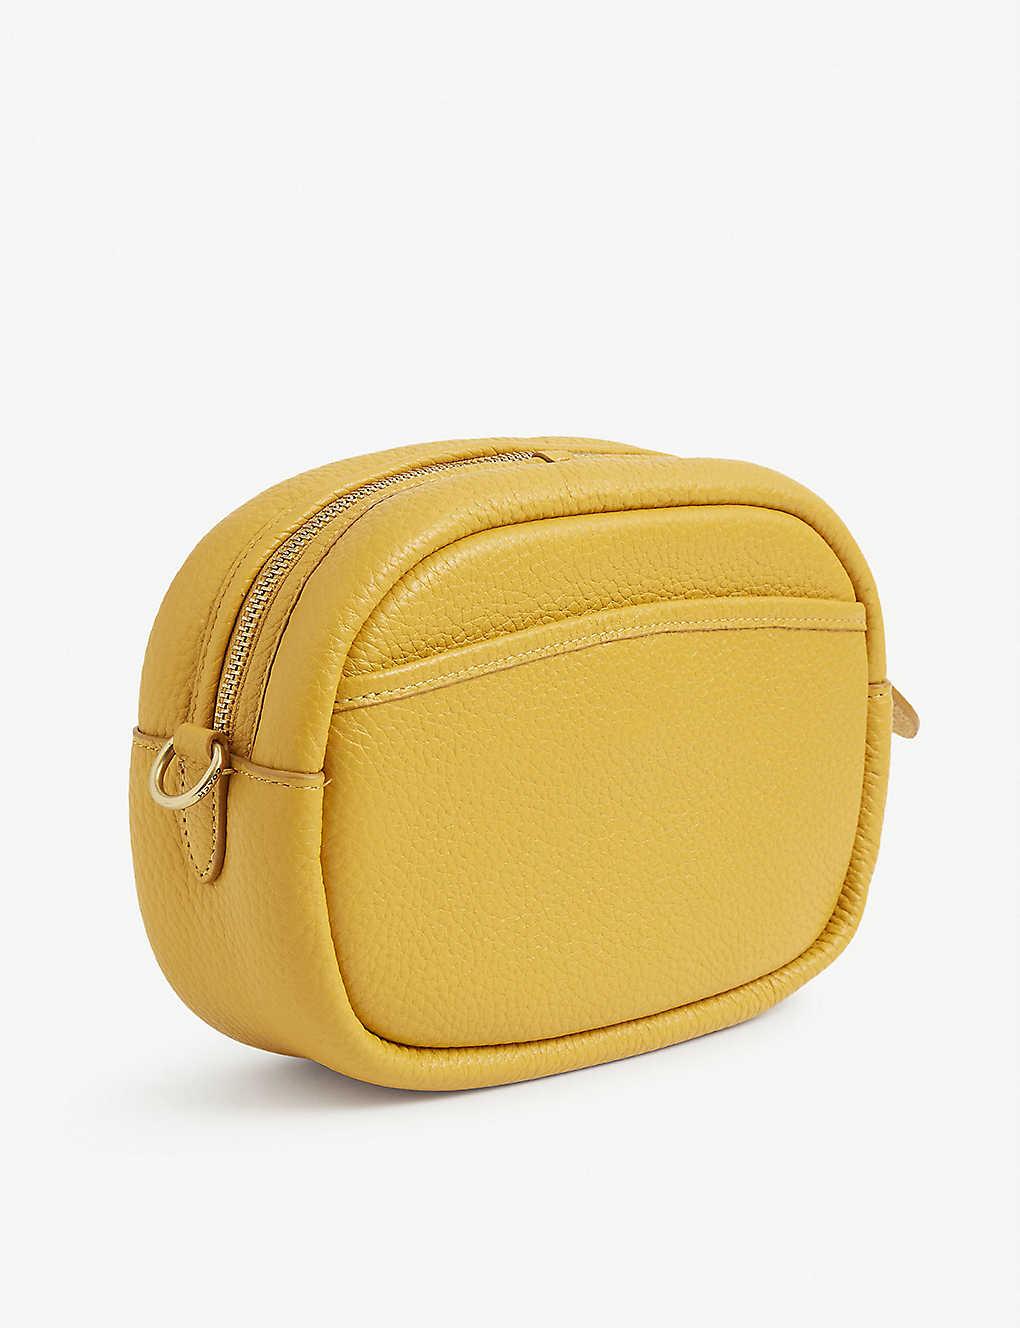 Patent leather crossbody bag Coach Yellow in Patent leather - 35328108